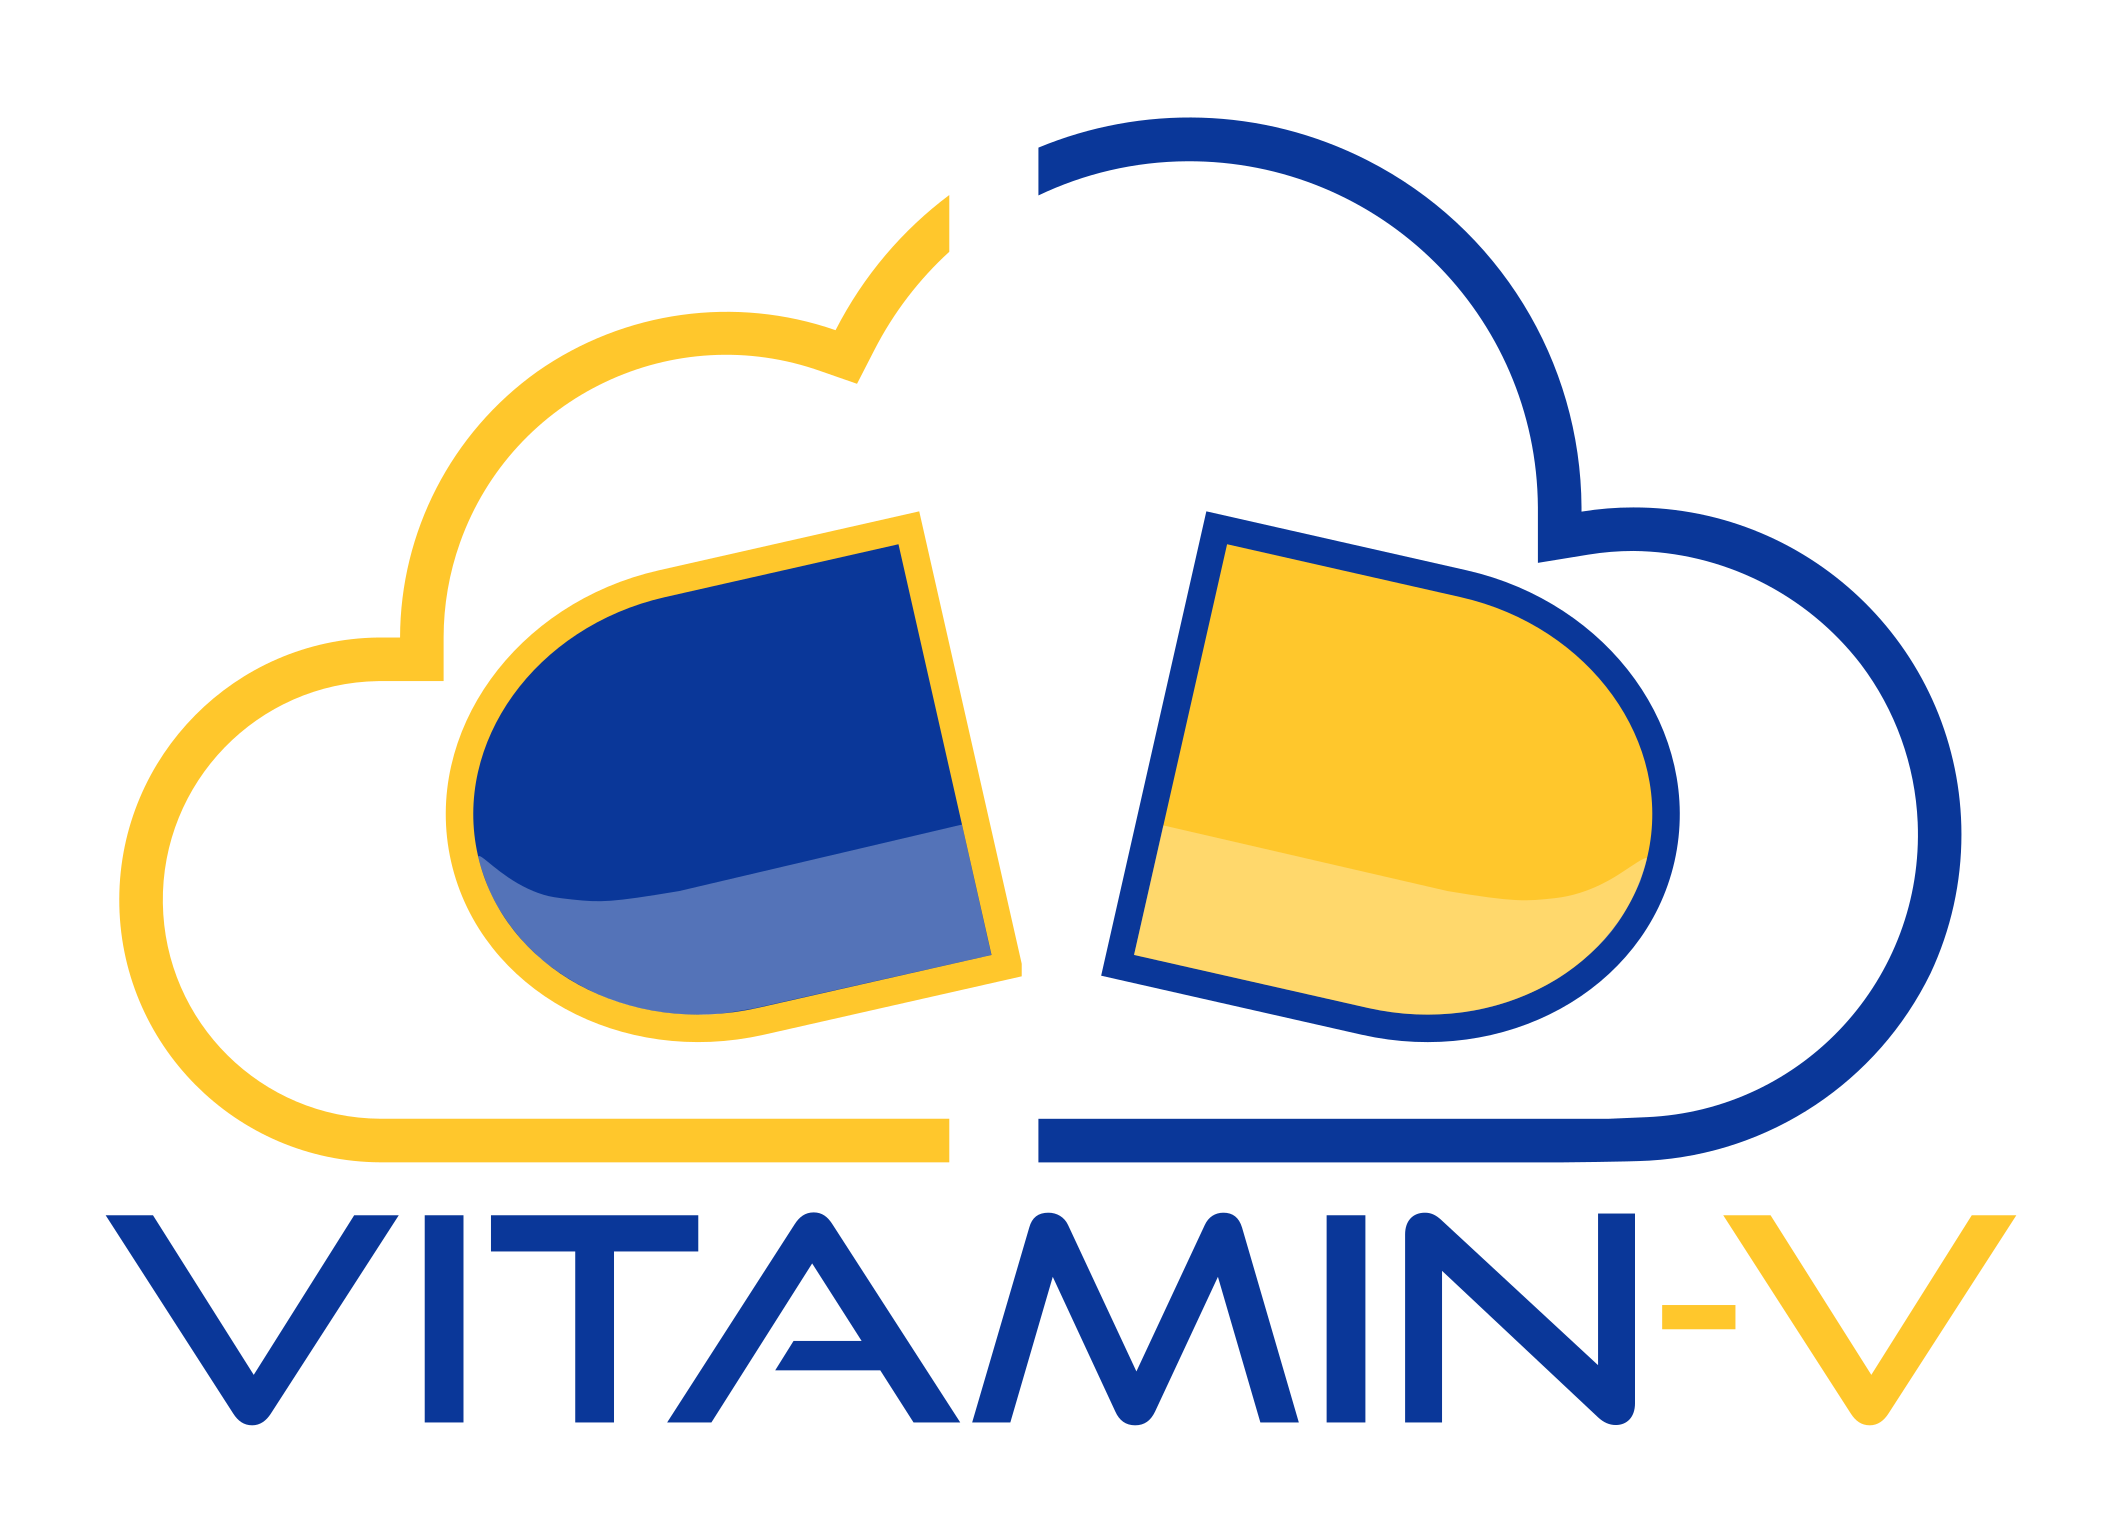 Virtual Environment and Tool-Boxing for Trustworthy Development of RISC-V based Could Services (Vitamin-V)